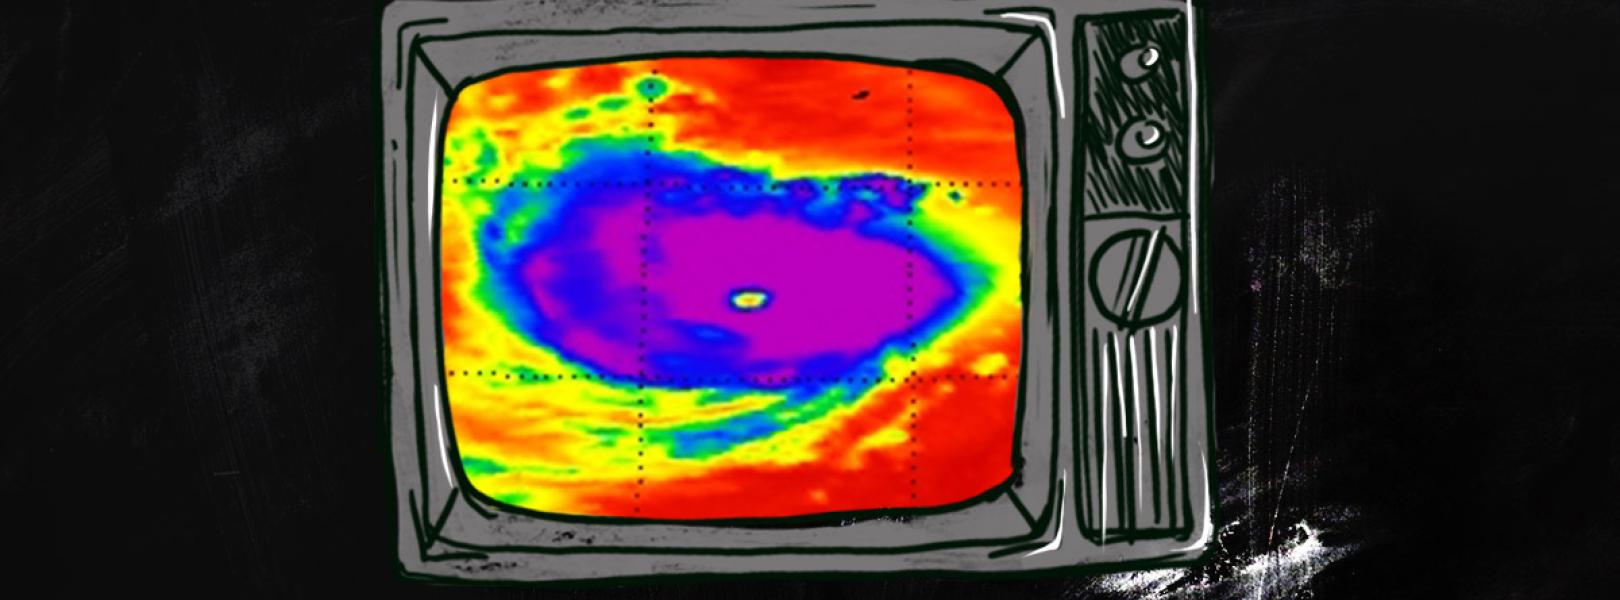 Broadcast-TV-climate-change-hurricanes